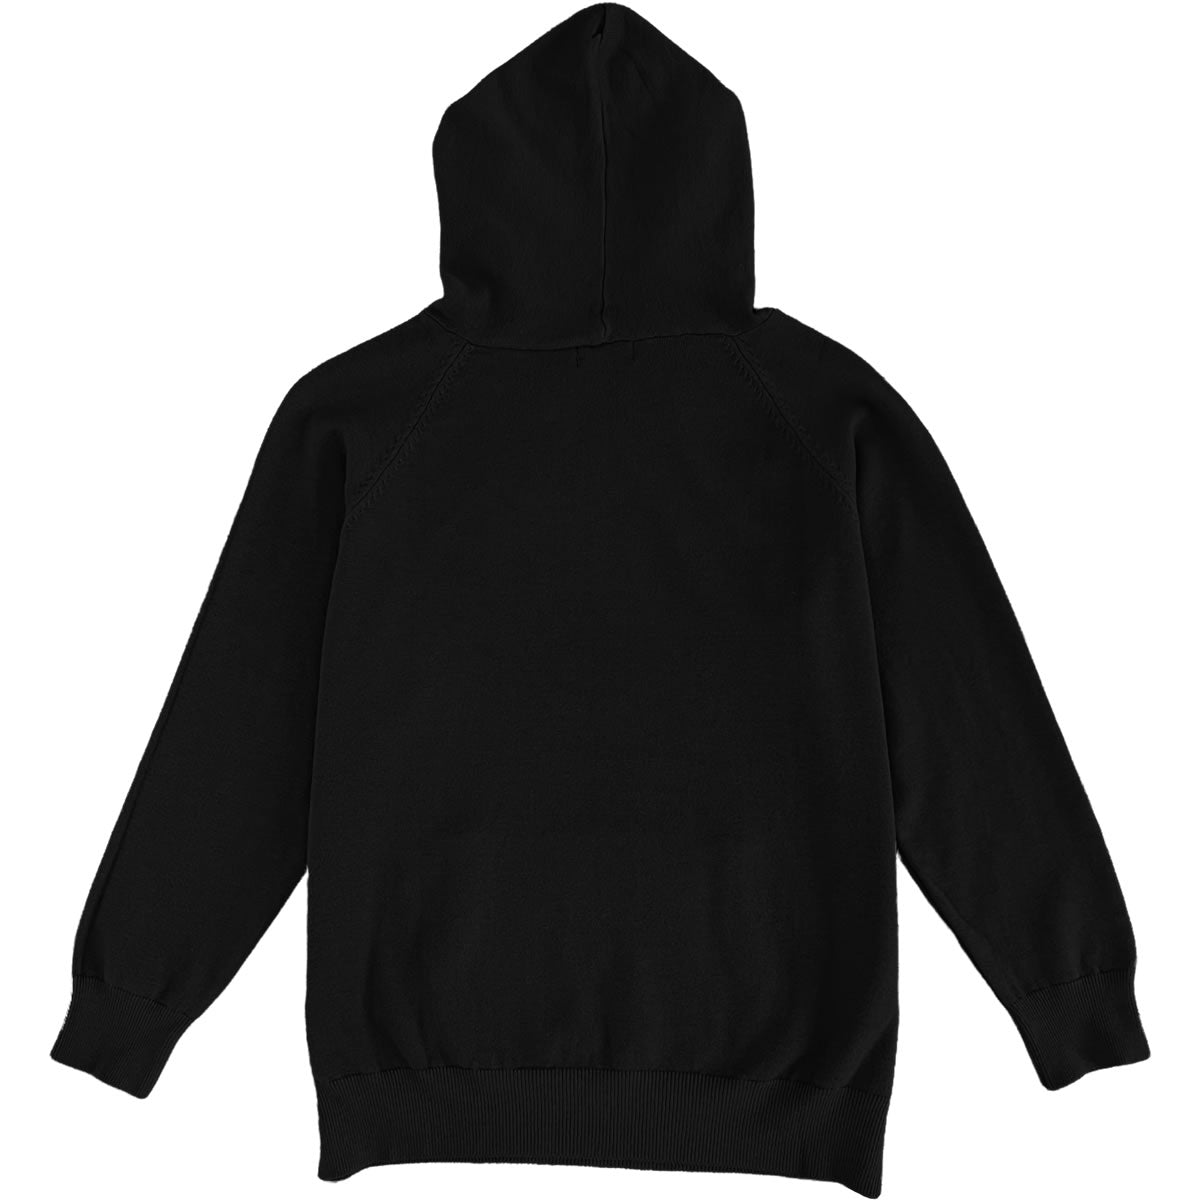 Black Mens Knit Pullover Hoodie Sweater